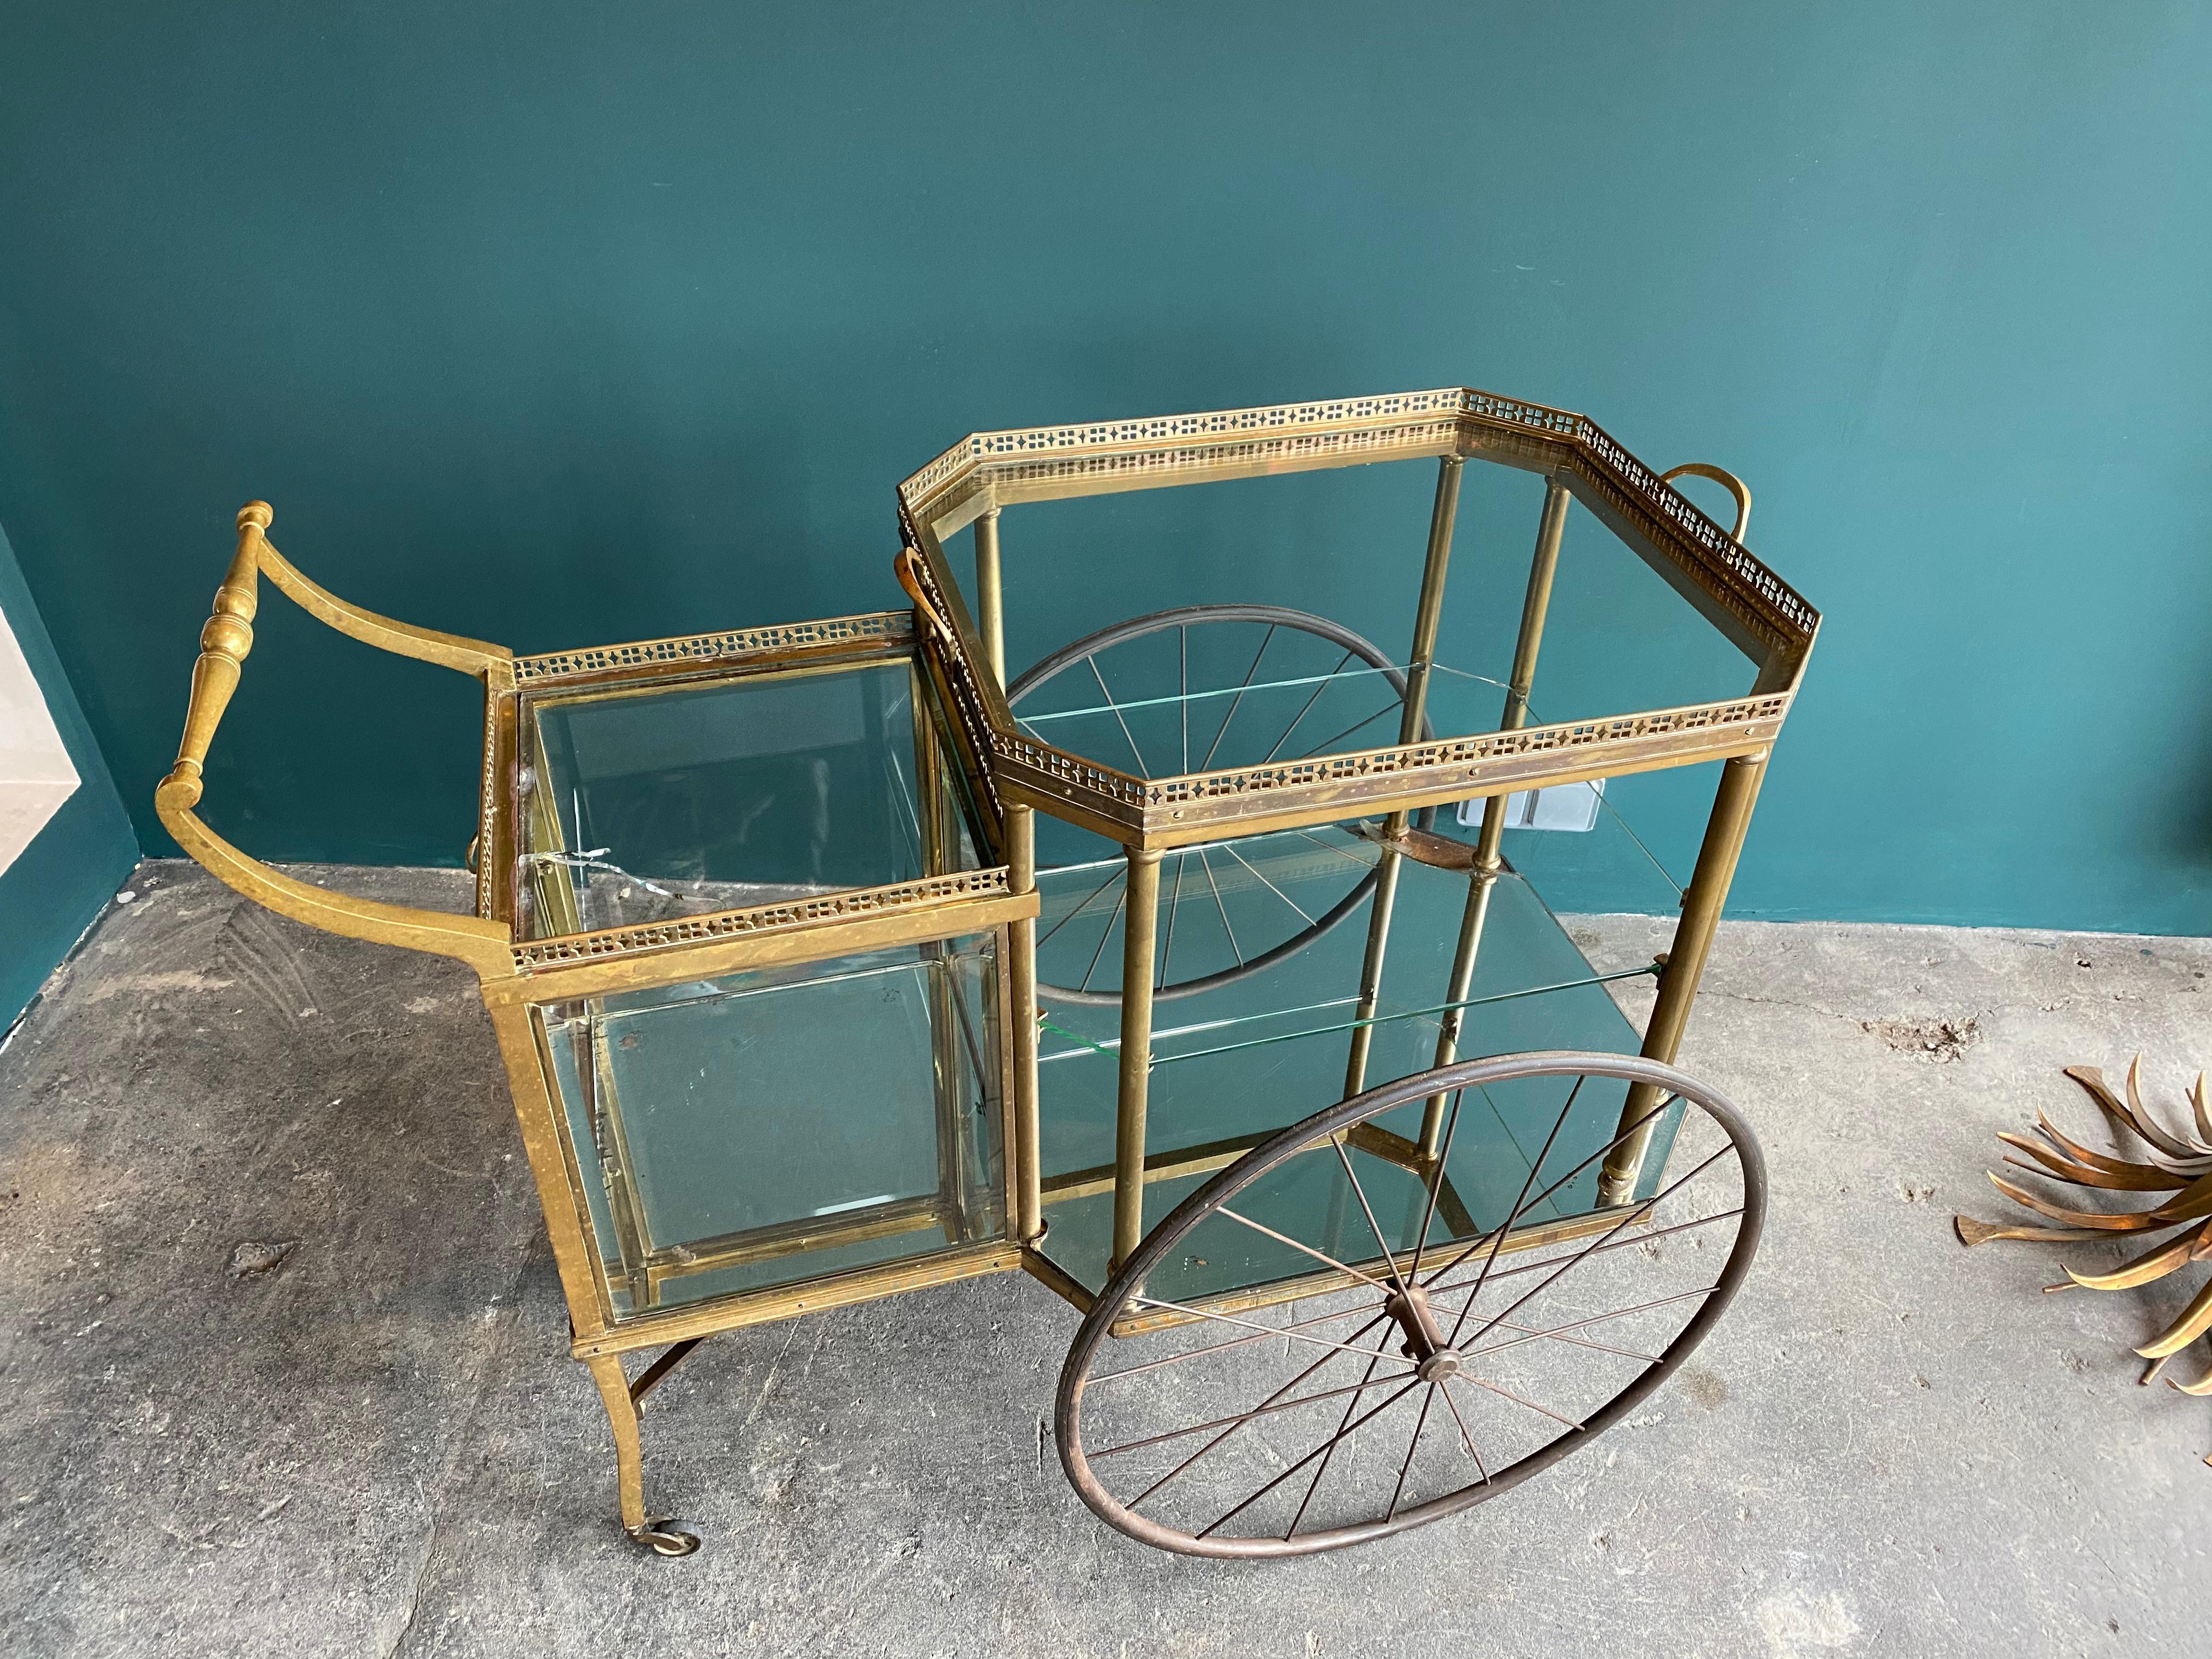 Belle Époque Antique Brass Bar Carriage/ Tea Trolley/ Table Trolley, Glass Case from a Castle